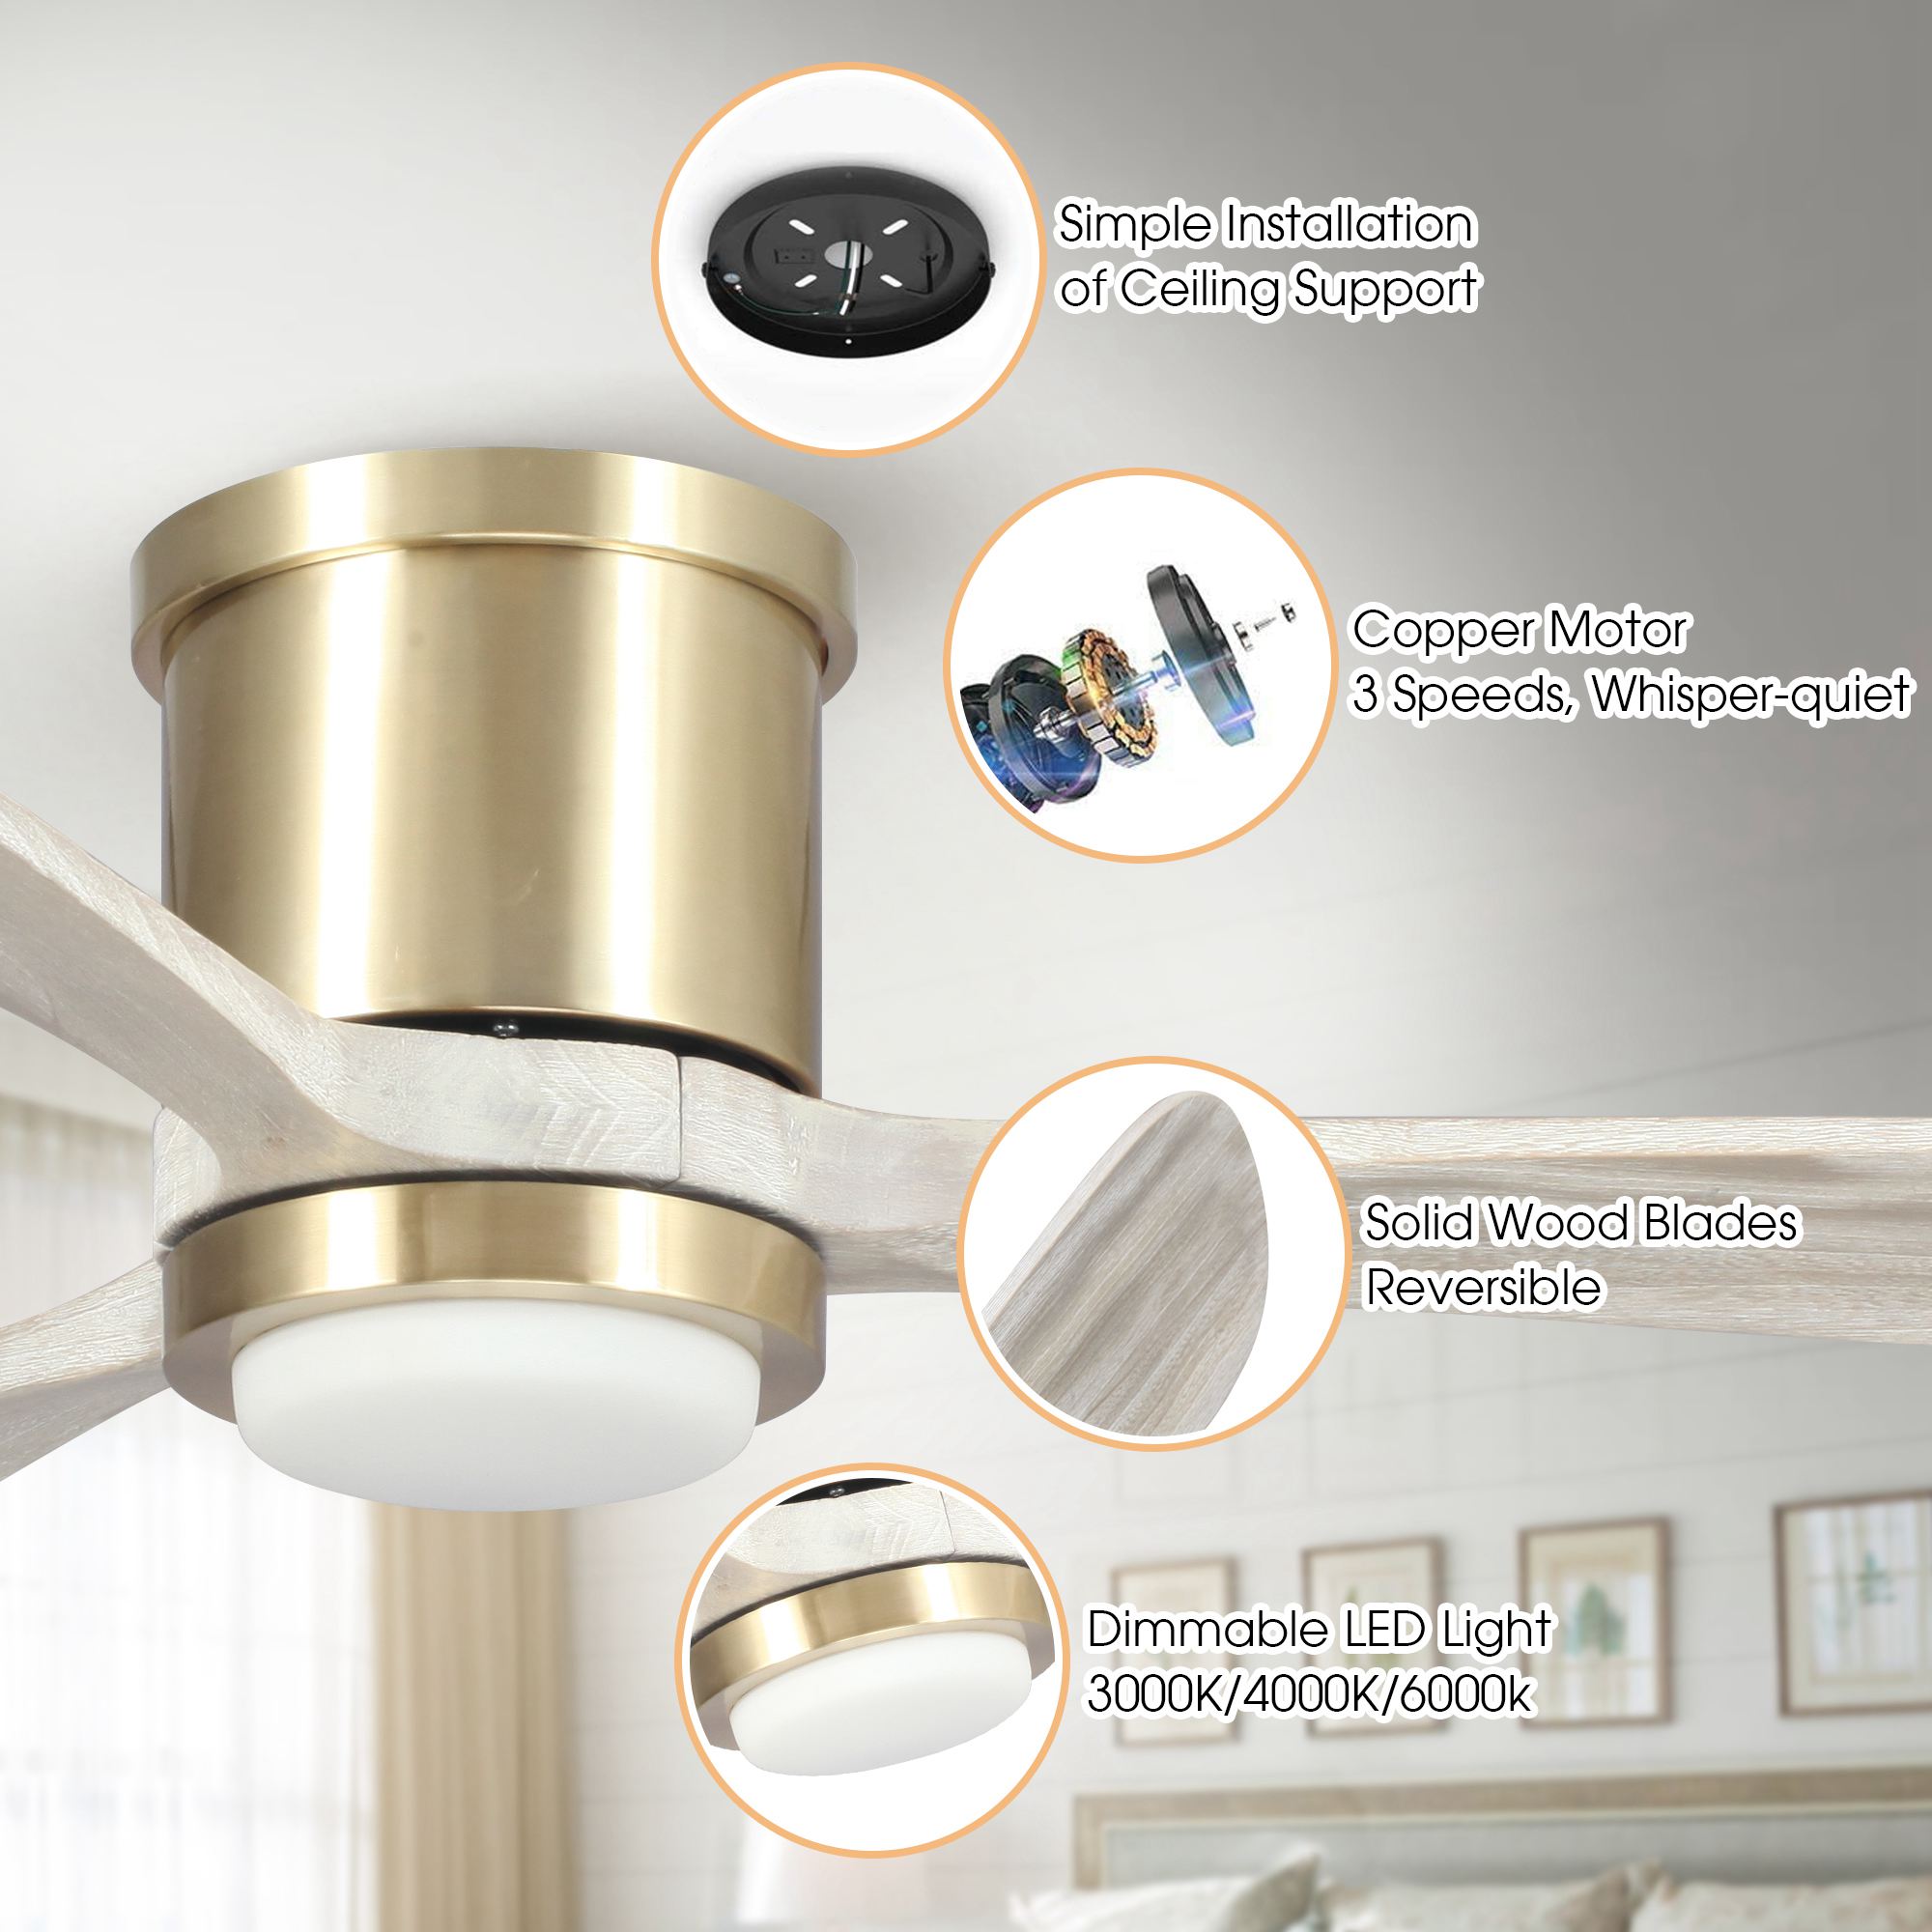 Low Profile Ceiling Fan with Lights 52 Inch Modern Flush Mount Ceiling Fan with Remote Control, Pale Gold - image 2 of 7